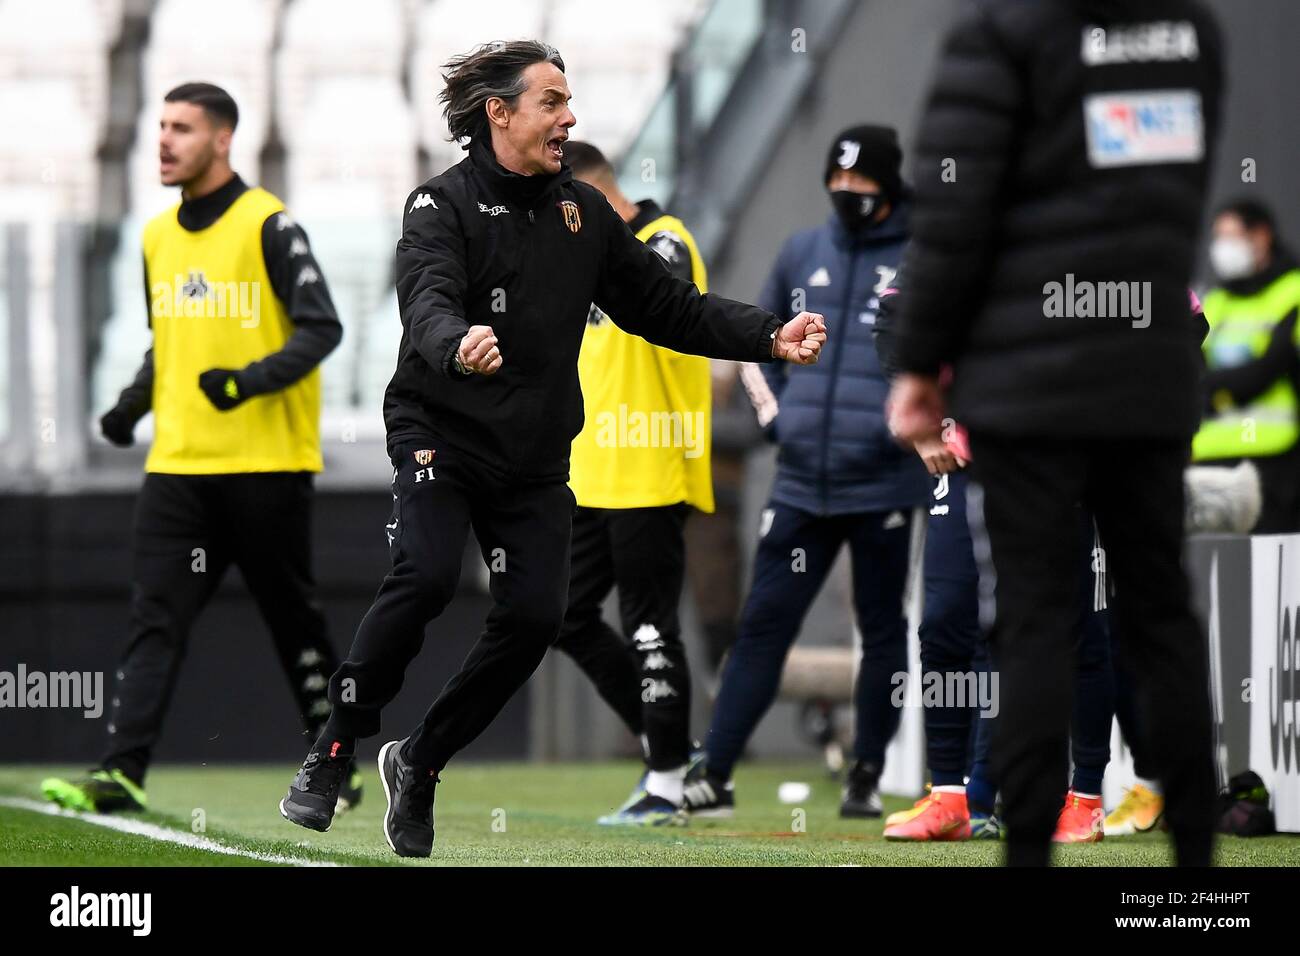 Turin, Italy - 21 March, 2021: Filippo Inzaghi, head coach of Benevento Calcio, celebrates  the victory at the end of the Serie A football match between Juventus FC and Benevento Calcio. Benevento Calcio won 1-0 over Juventus FC. Credit: Nicolò Campo/Alamy Live News Stock Photo